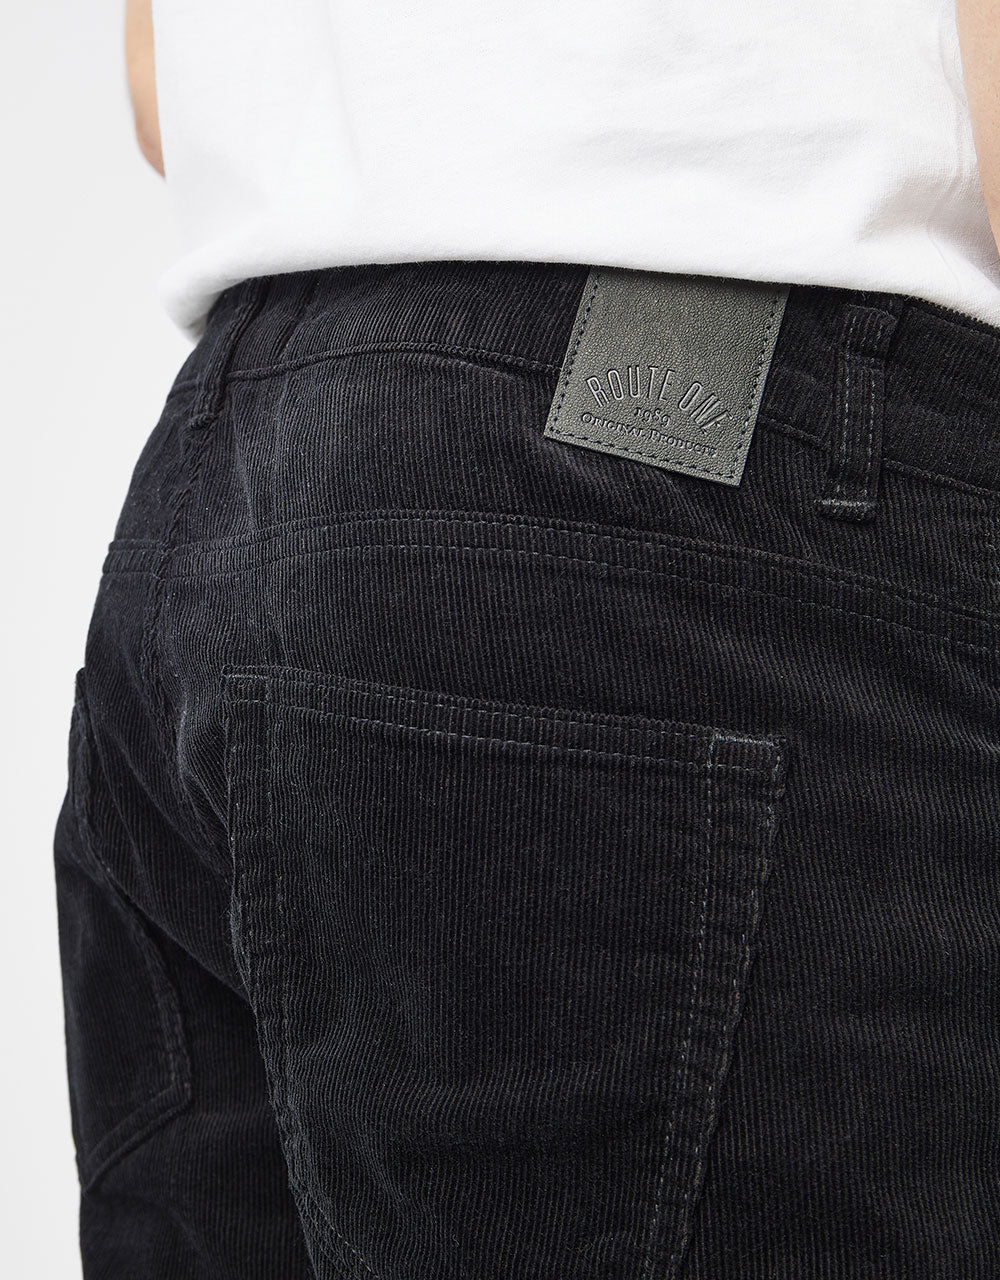 Route One Slim Fit Cords - Black